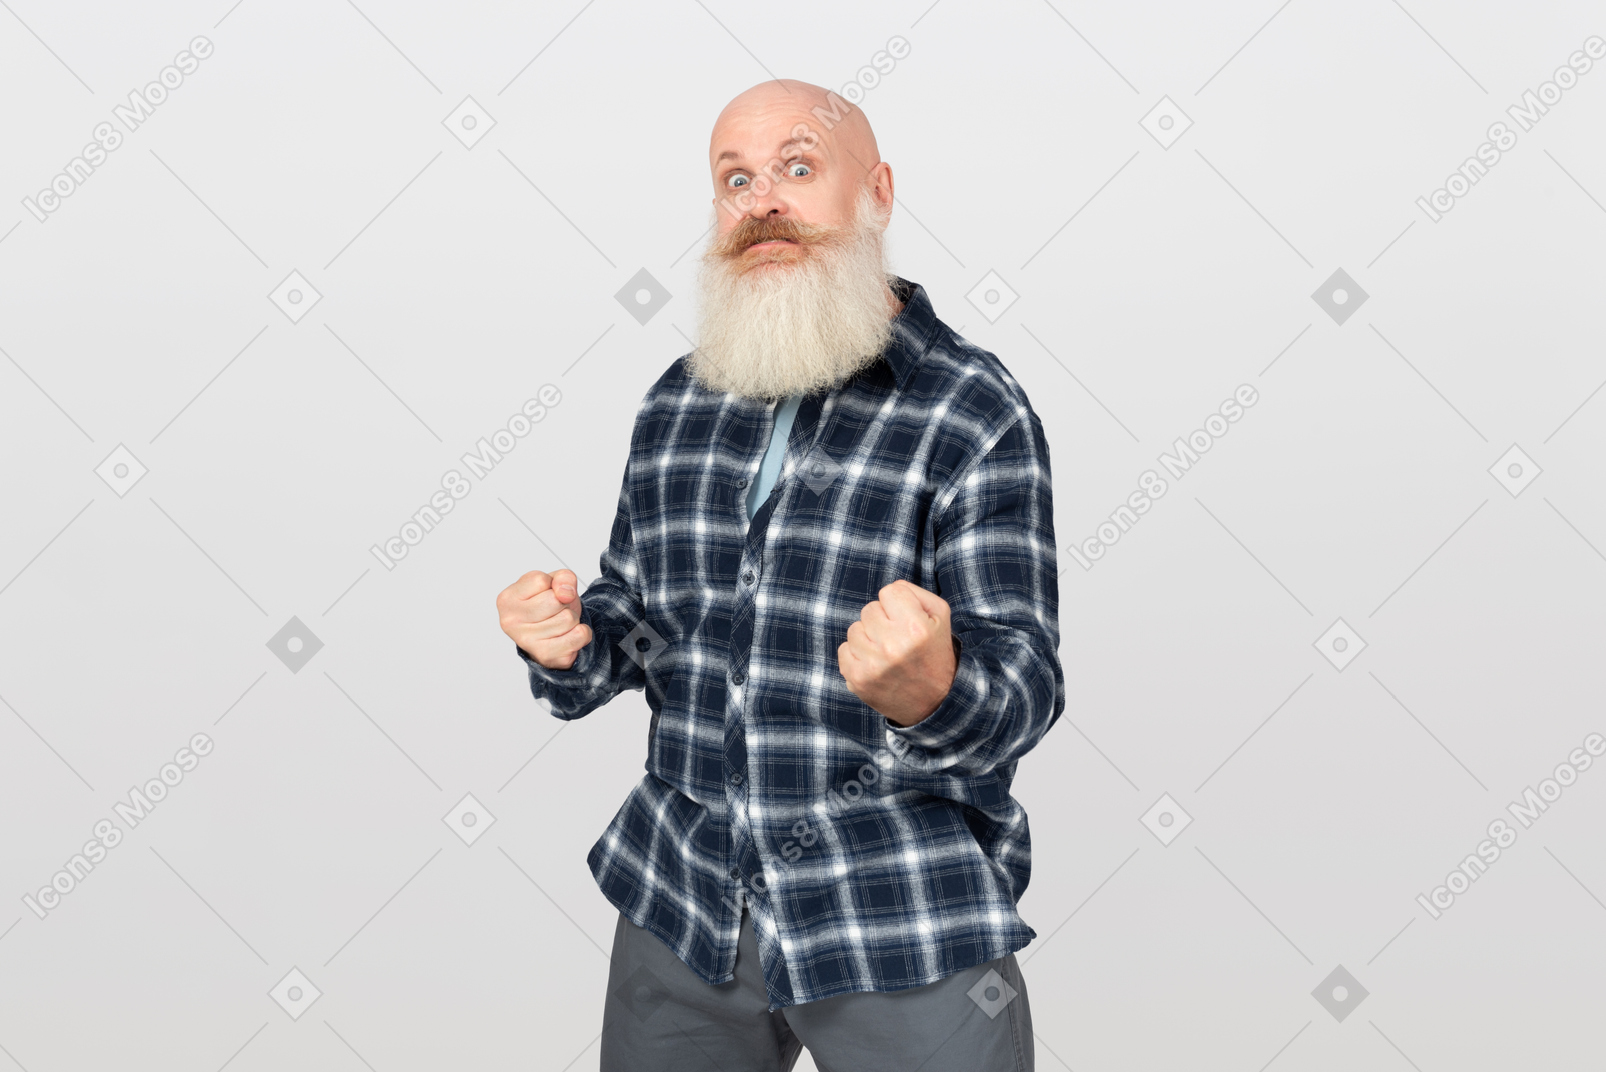 Bearded man with clenched fists